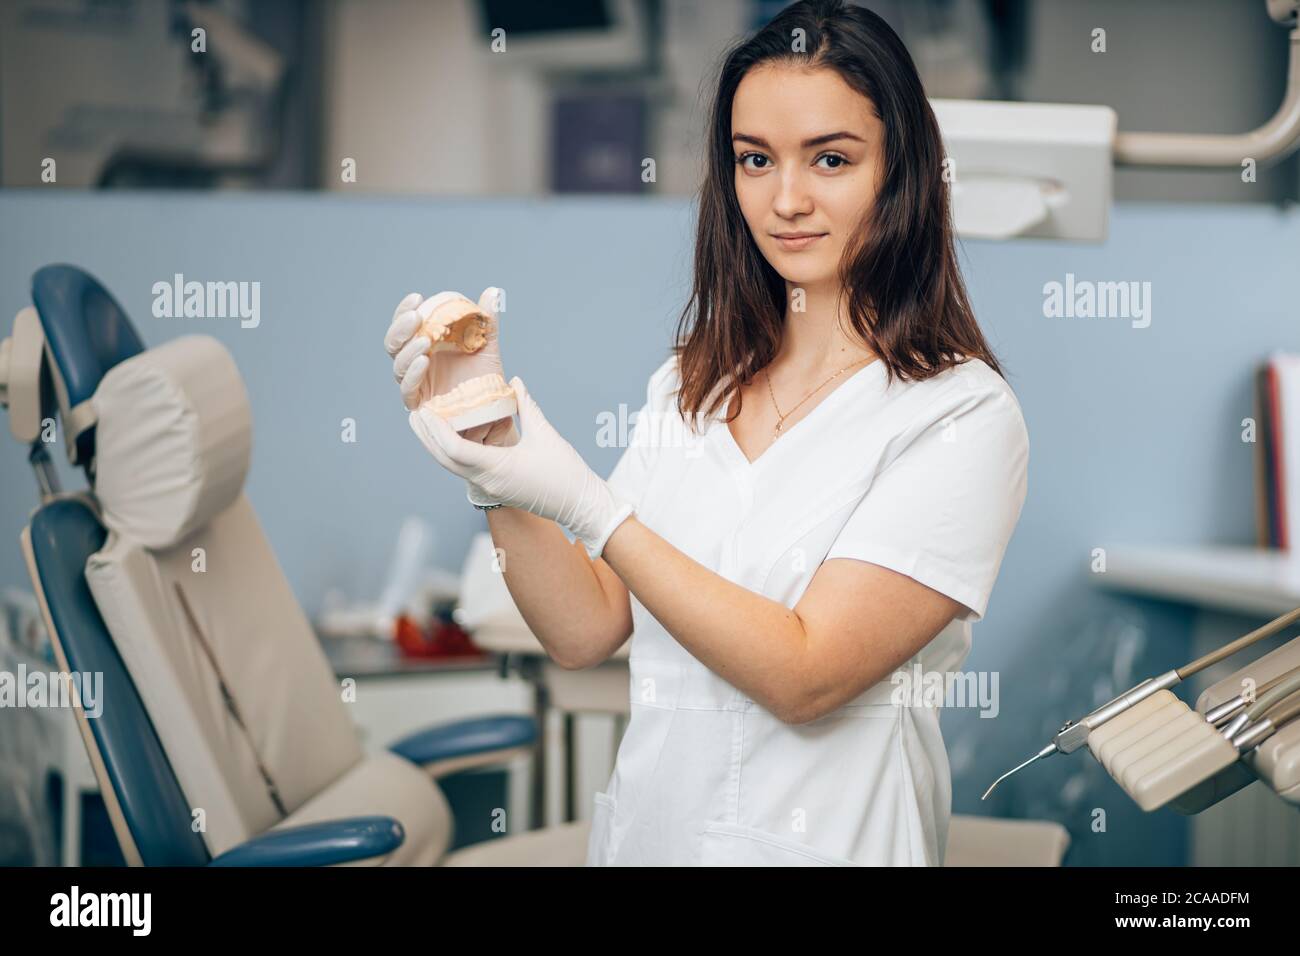 portrait of dental specialist at work, wearing white doctor's uniform, using medical instruments and equipment, holding prosthesis in hands. Healthcar Stock Photo